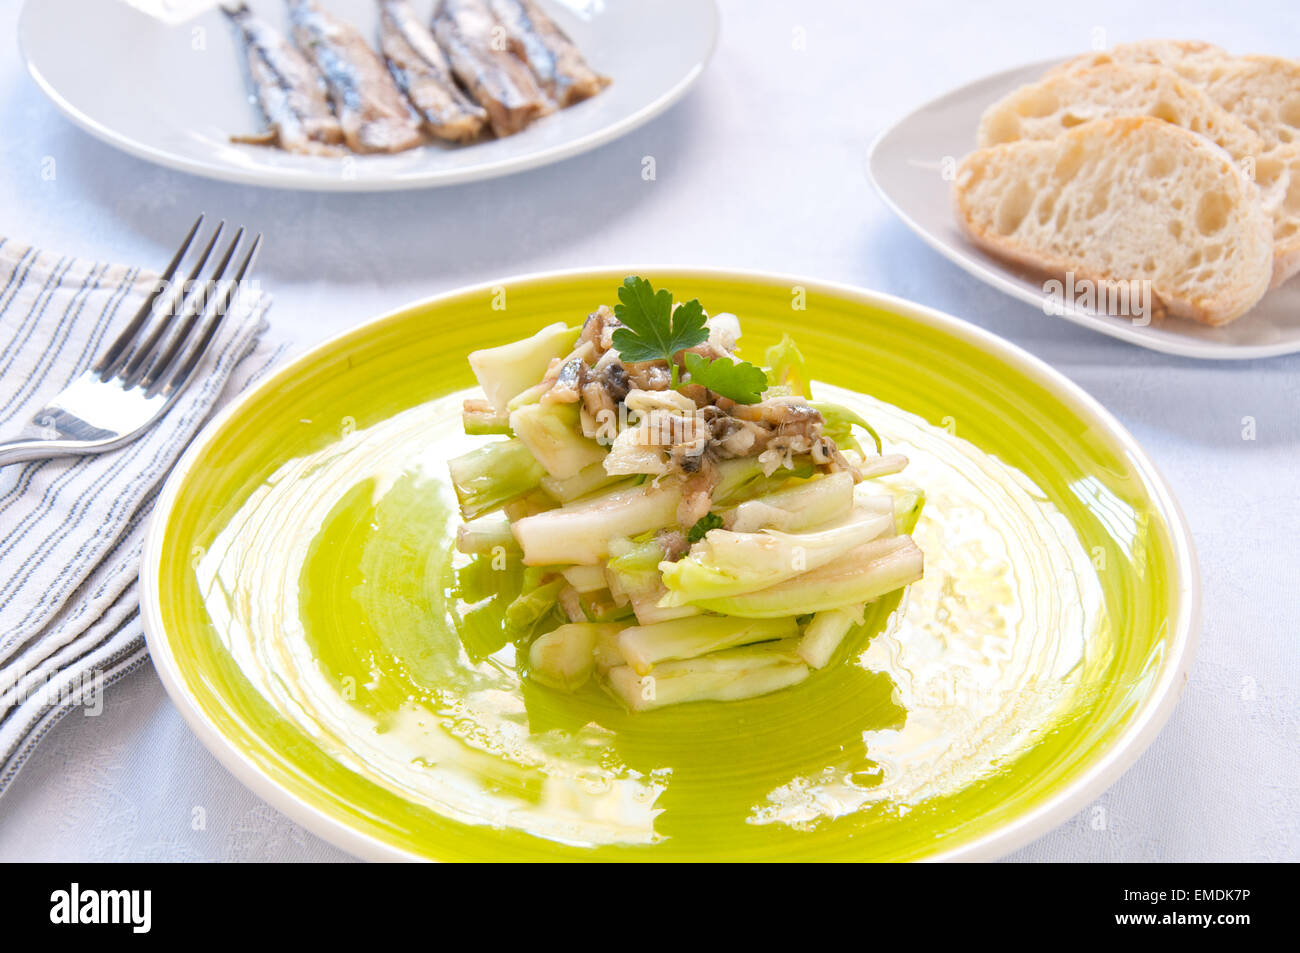 Chicory salad typical of the city of Rome Stock Photo